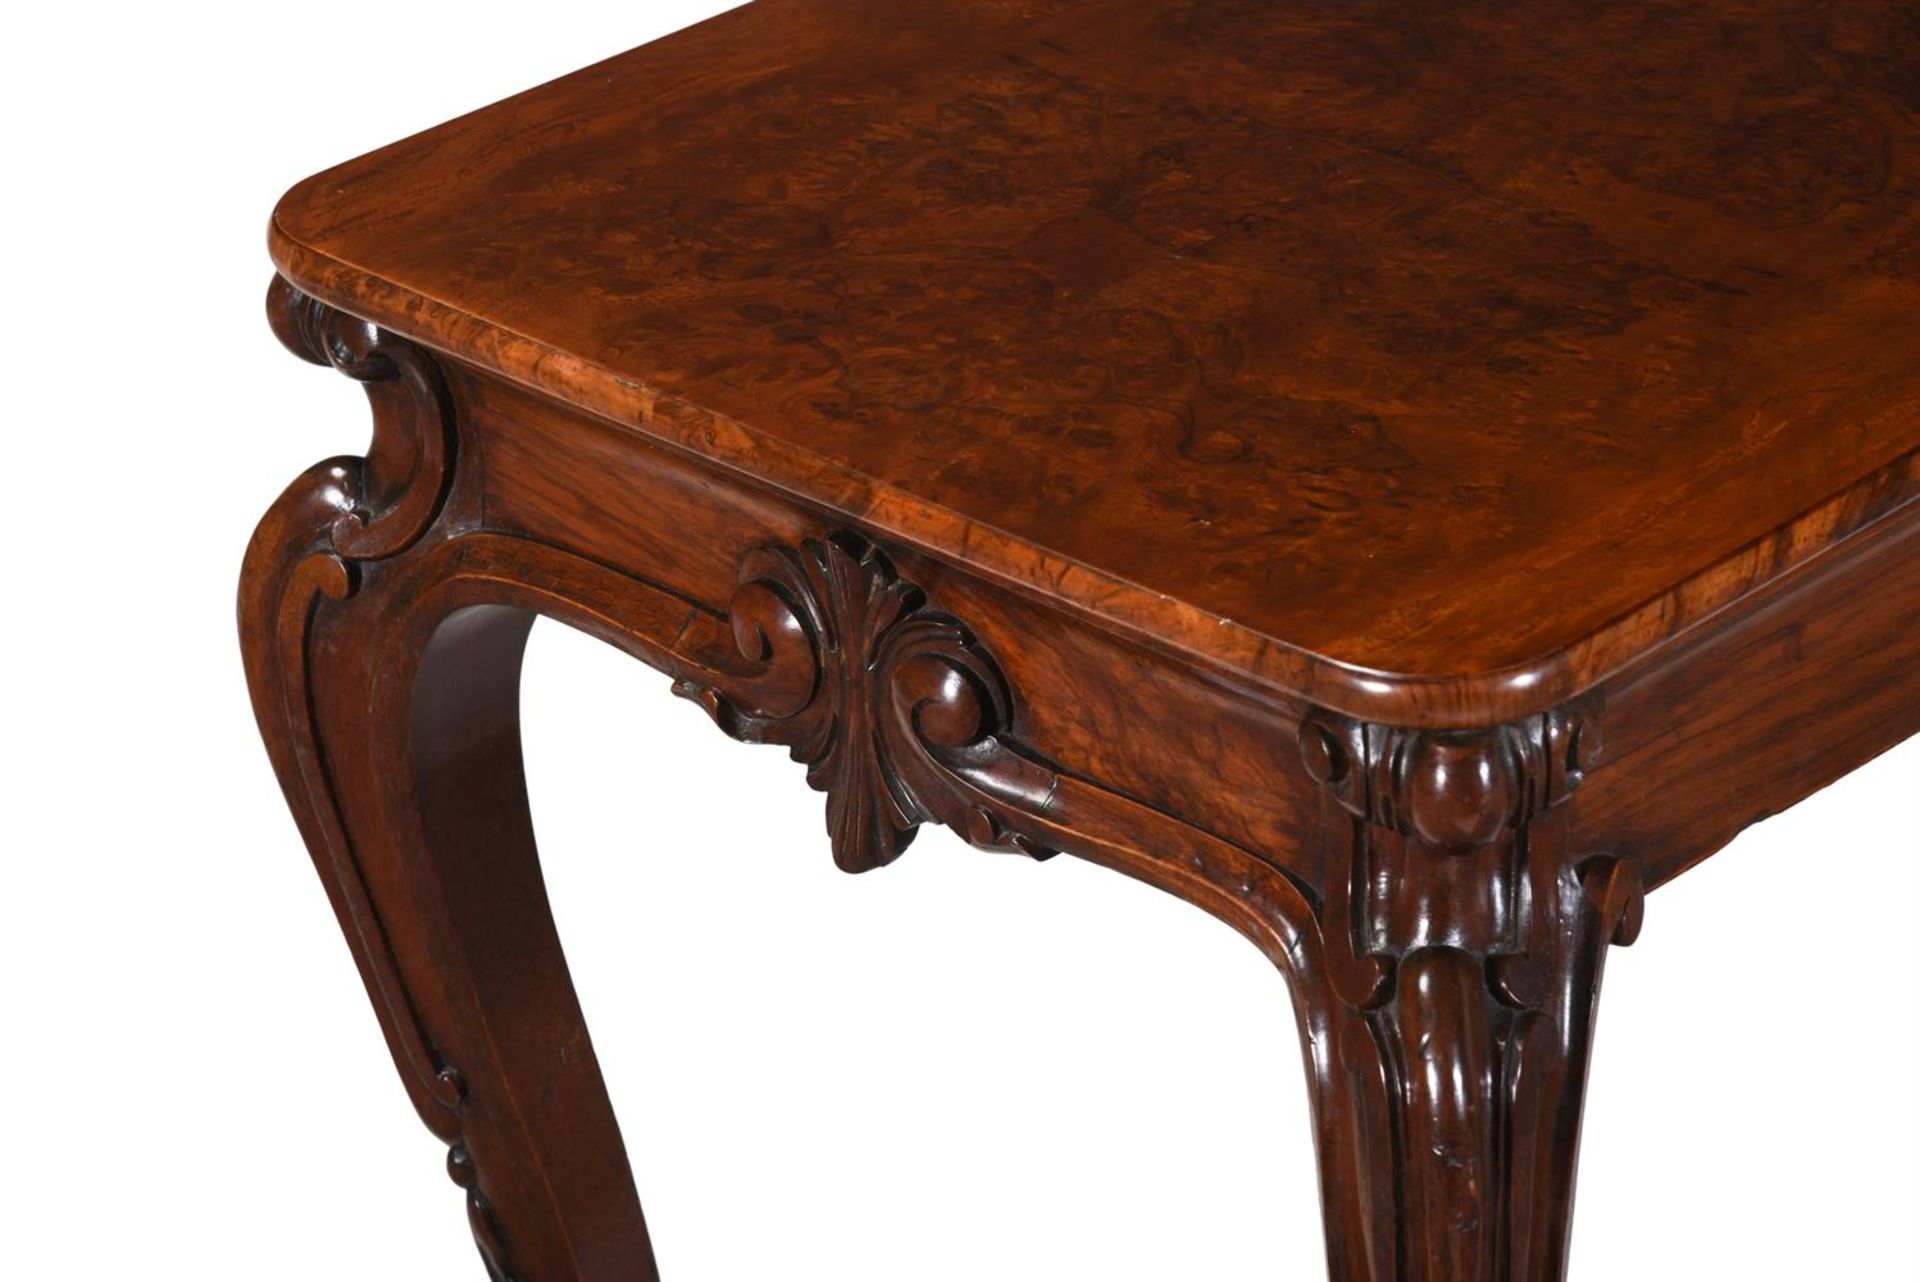 A VICTORIAN FIGURED WALNUT SIDE OR CENTRE TABLE, MID 19TH CENTURY - Image 2 of 2